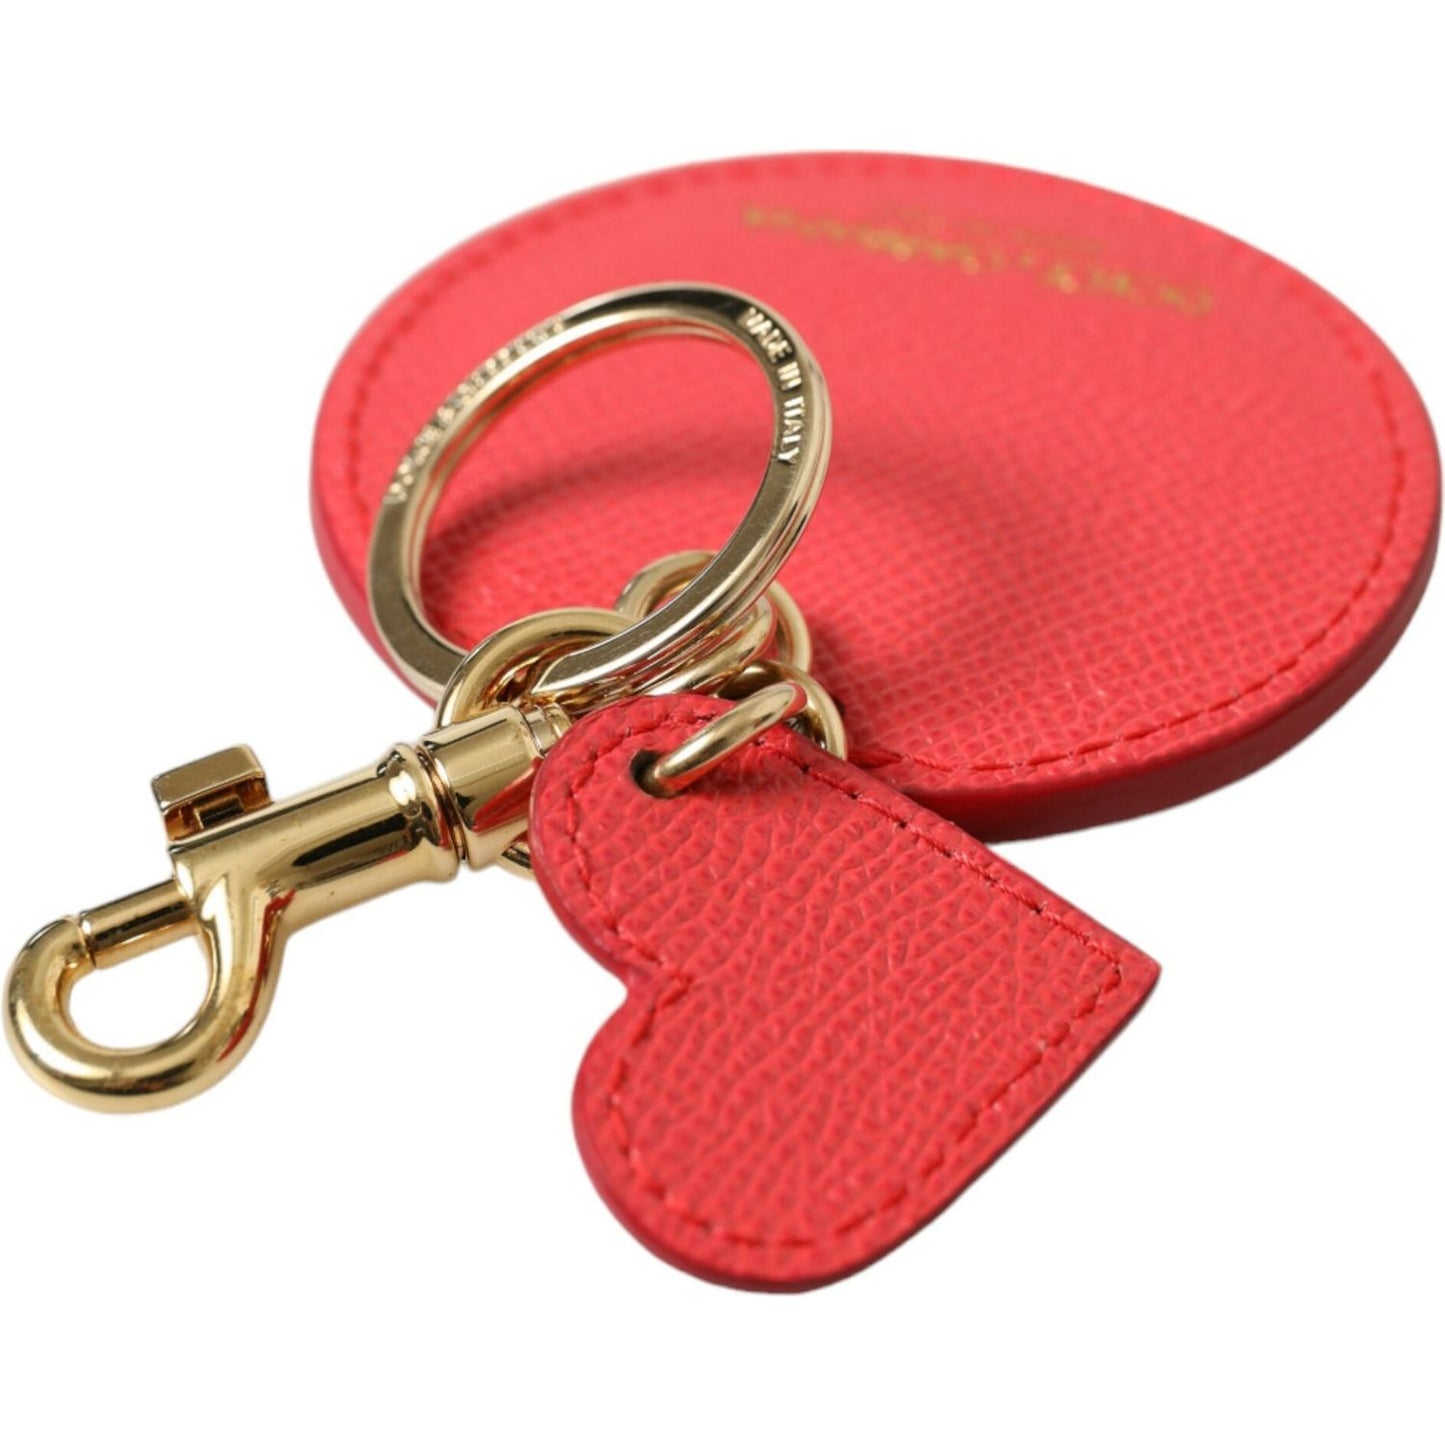 Dolce & Gabbana | Elegant Red Leather Keychain with Gold Accents| McRichard Designer Brands   